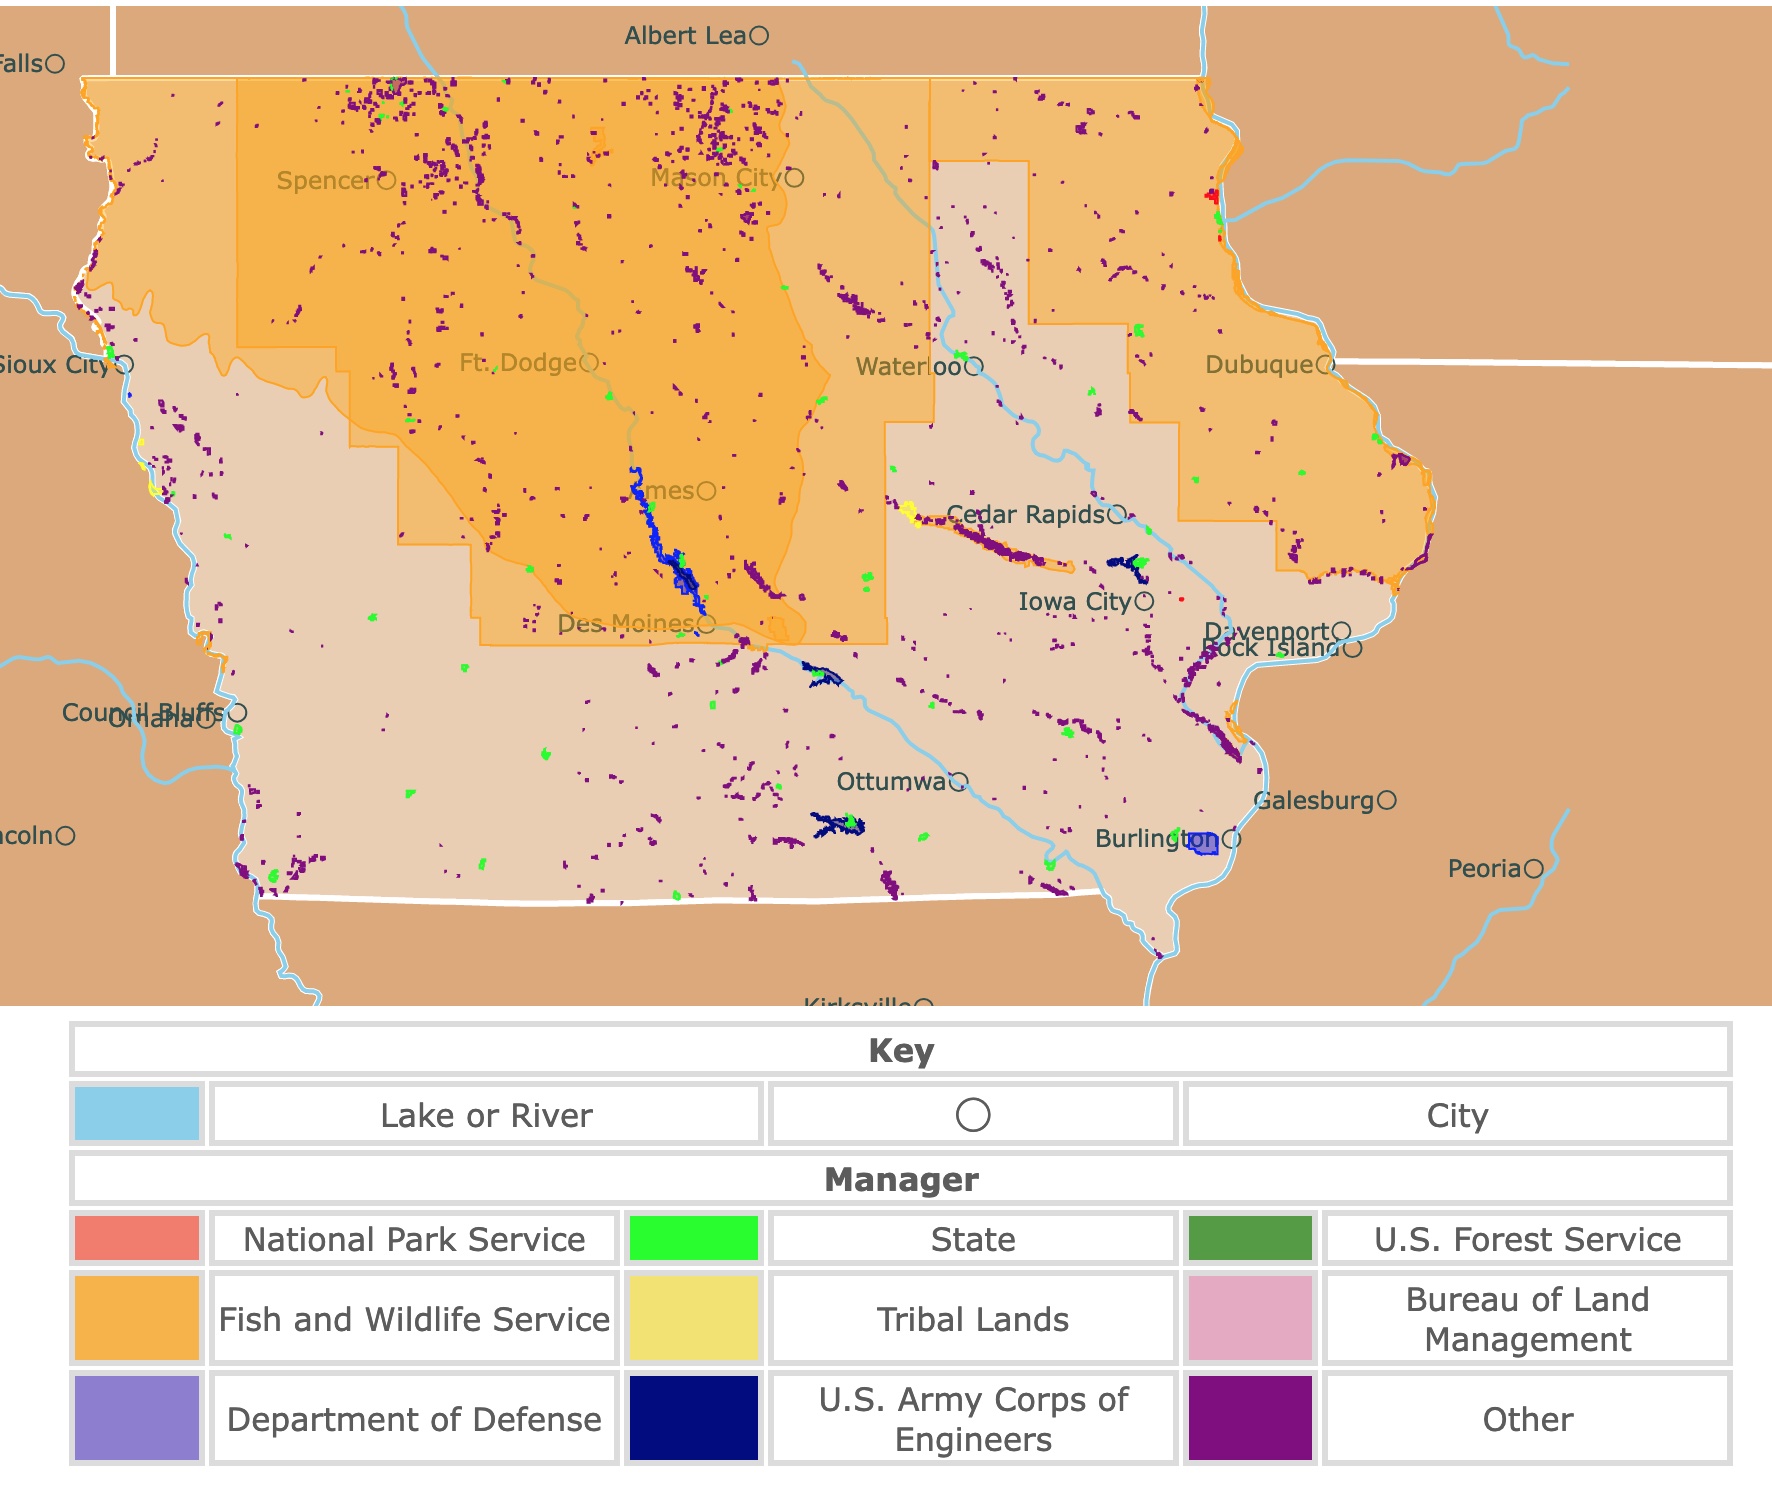 Map of Iowa's state parks, national parks, forests, and public lands areas